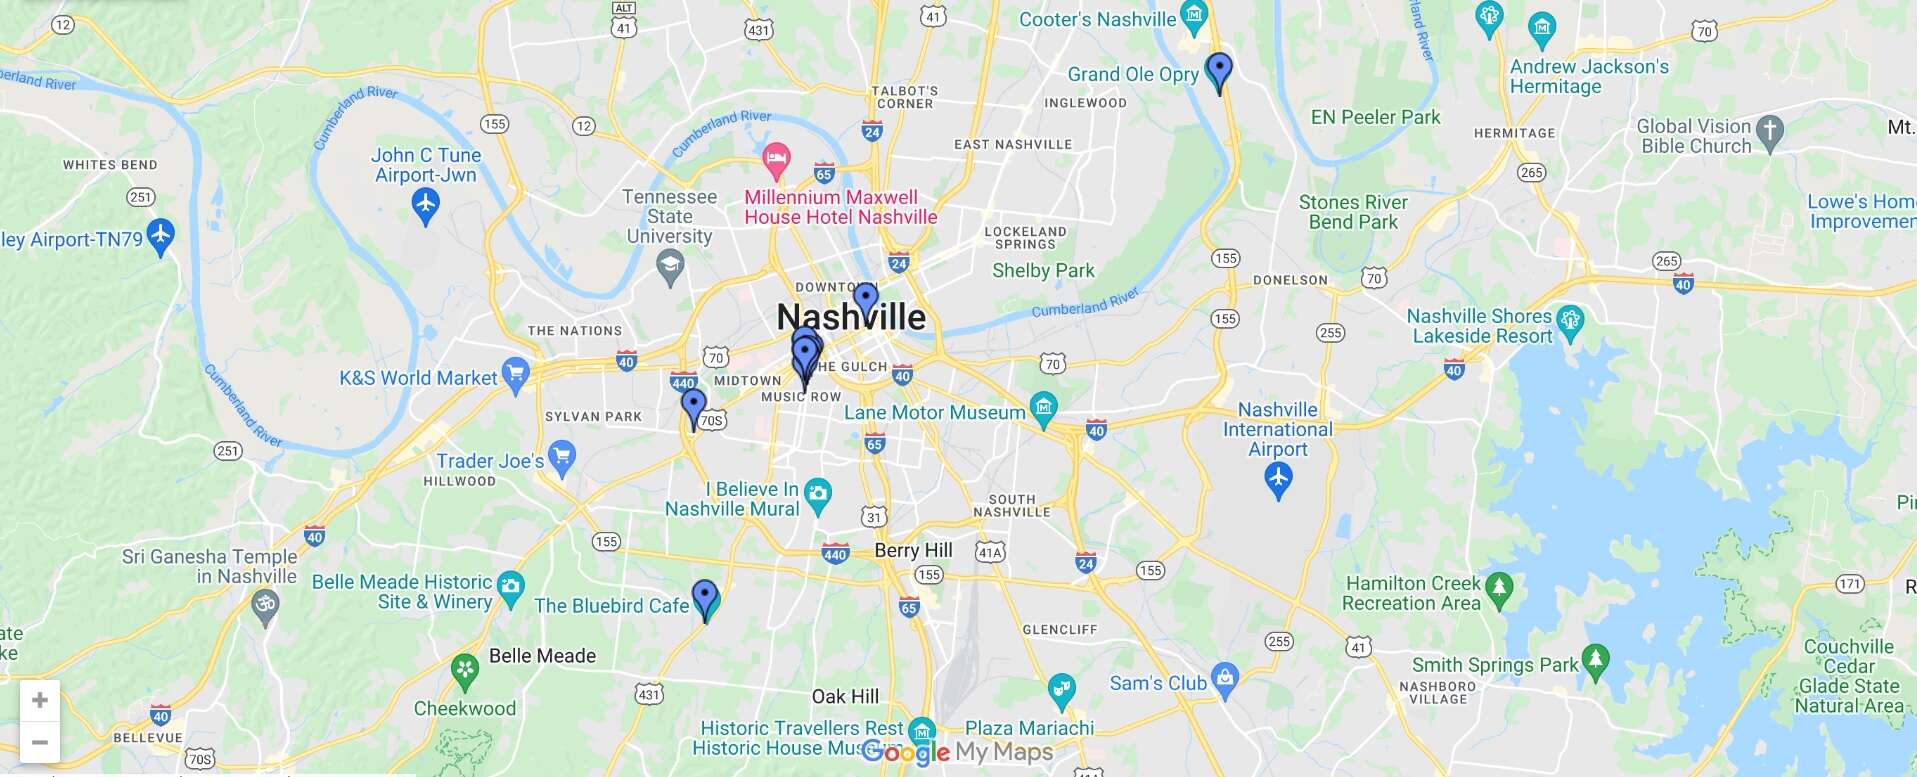 Map of Nashville City | Political, Outline, Geography And Road Map